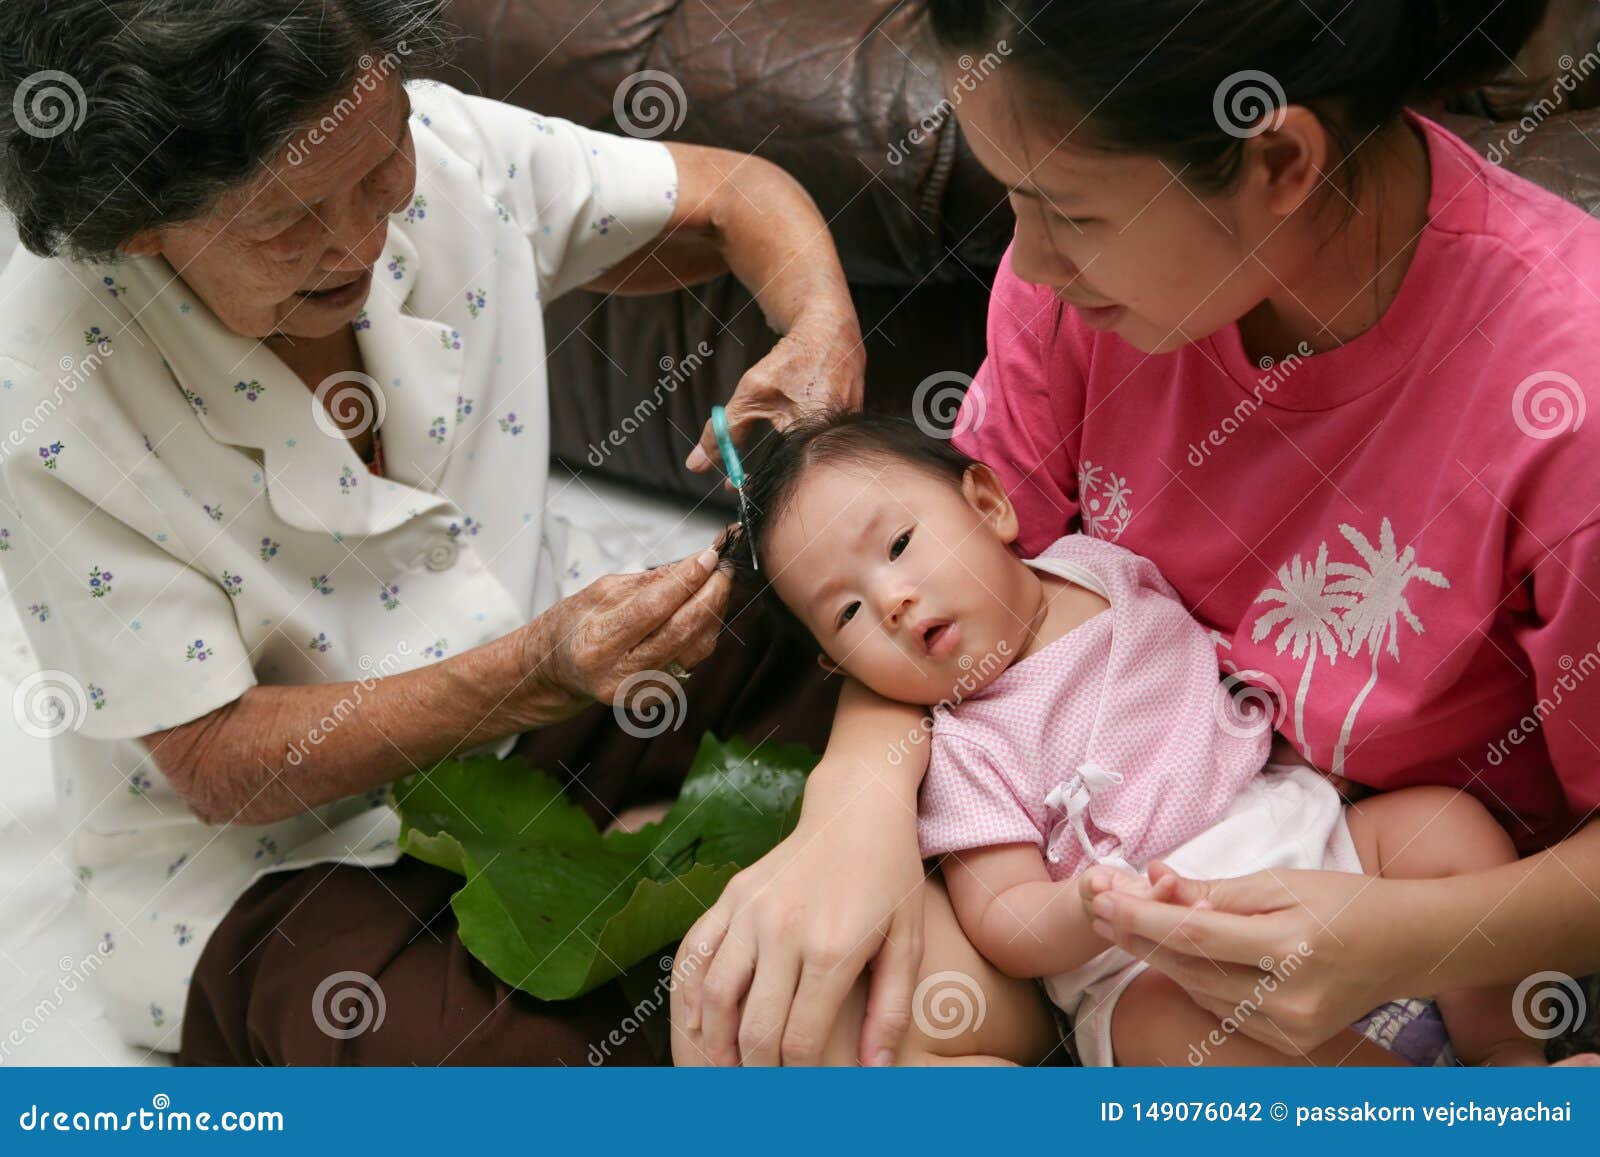 5,198 Baby Haircut Stock Photos - Free & Royalty-Free Stock Photos from  Dreamstime